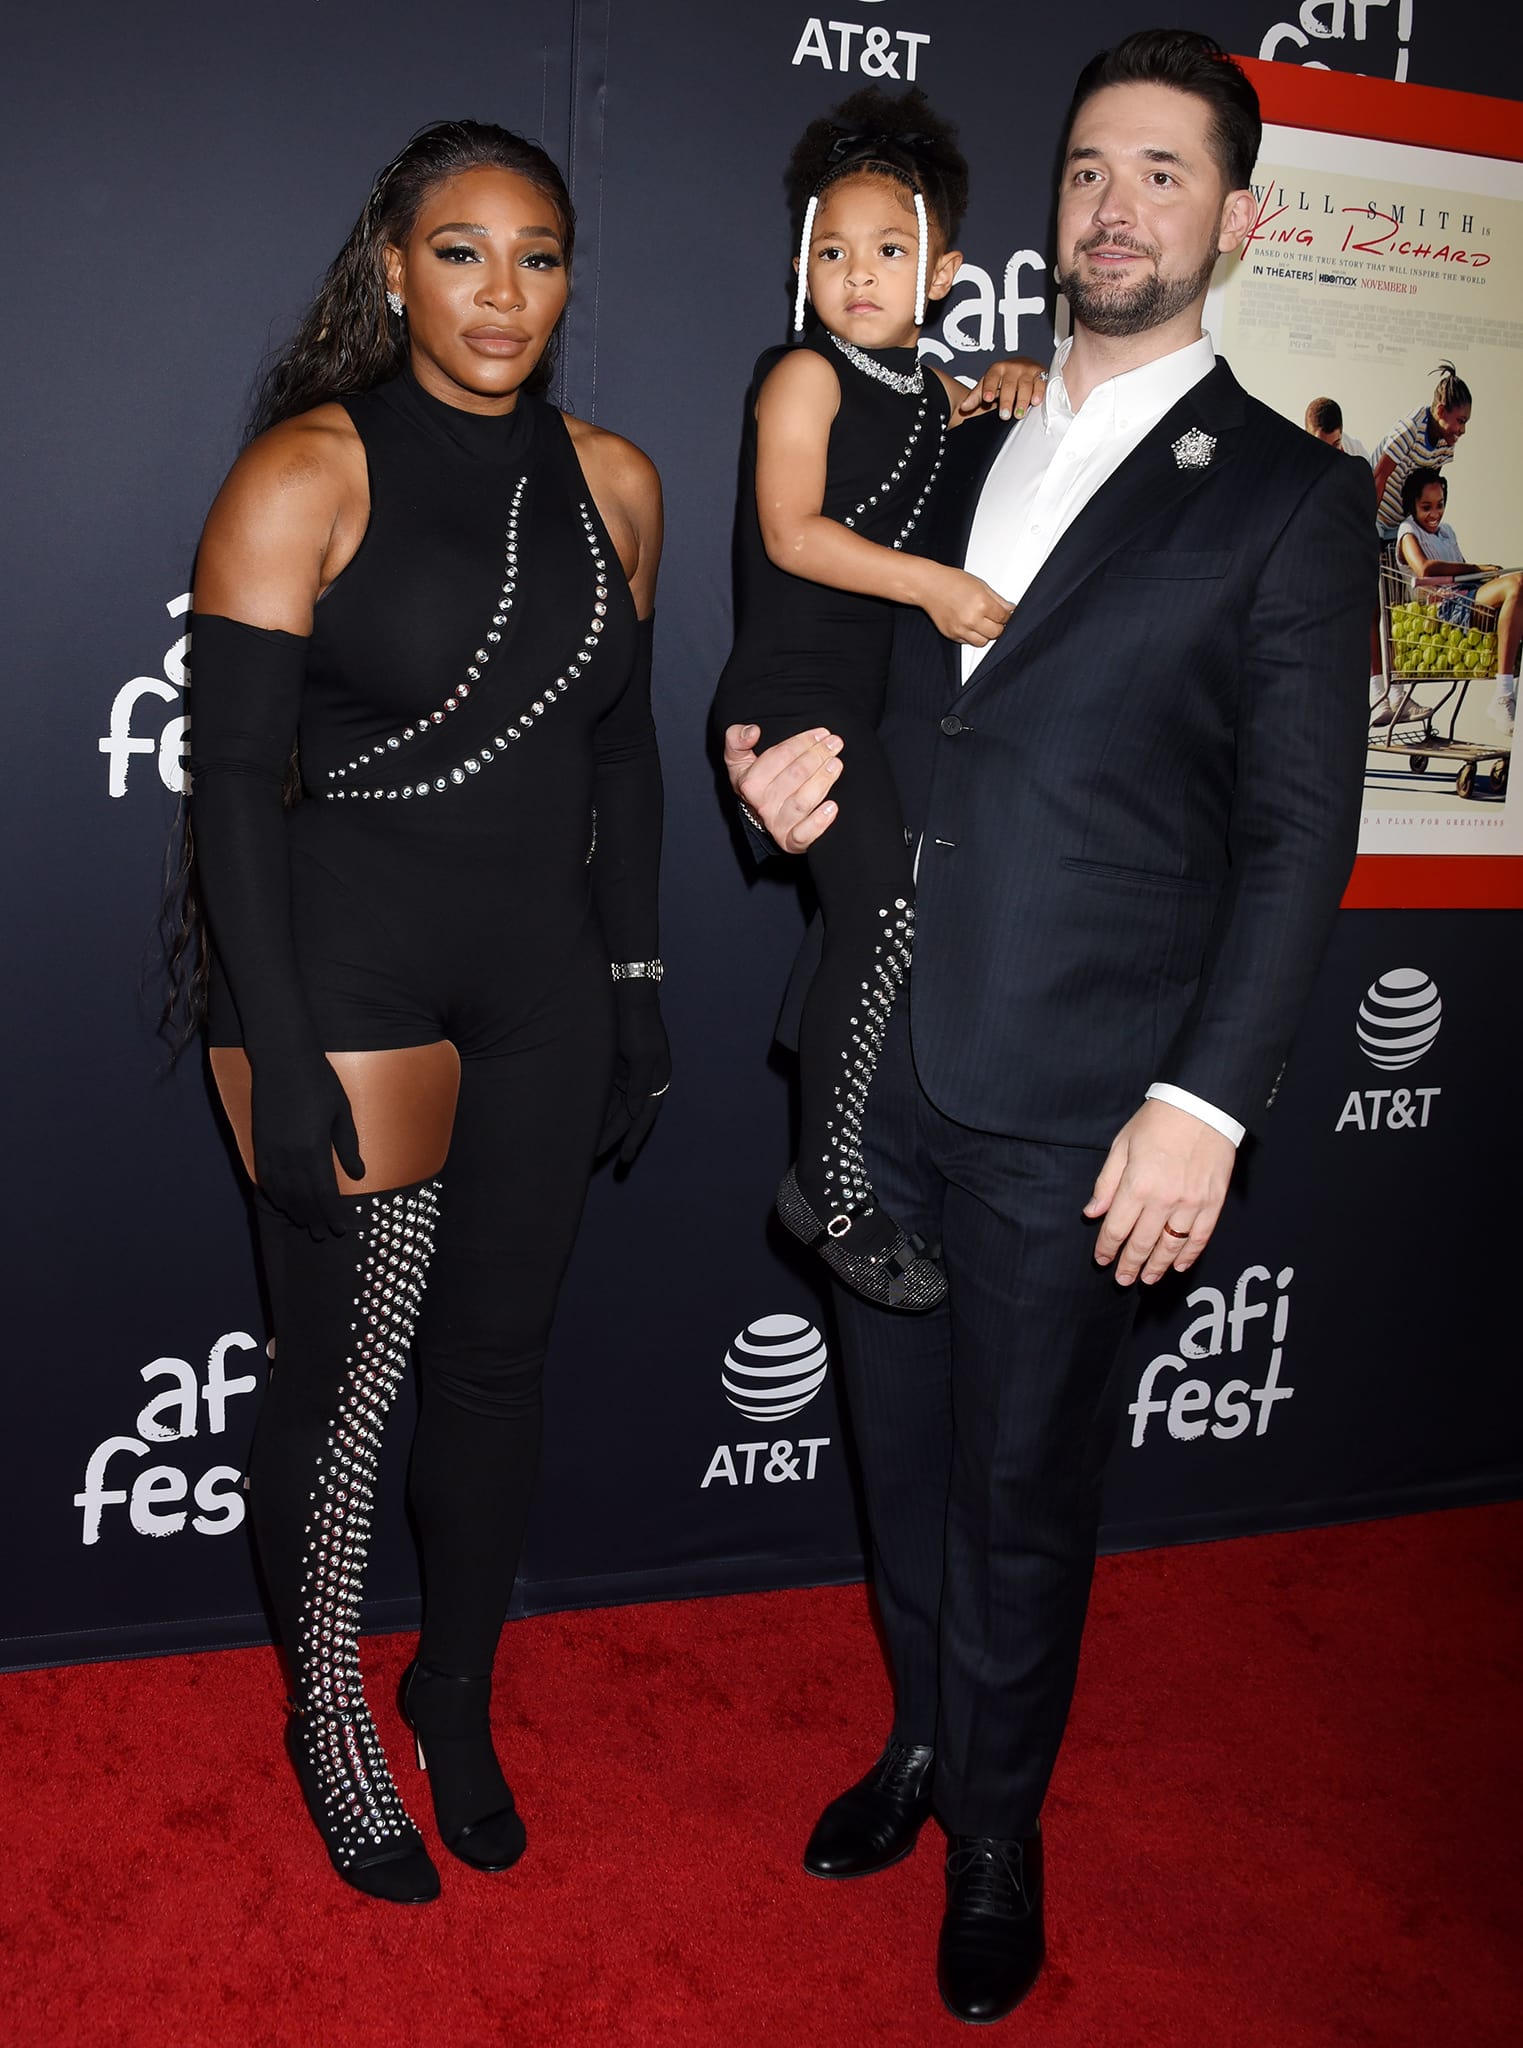 Serena Williams with her four-year-old daughter Olympia and husband Alexis Ohanian at the 2021 AFI Fest Closing Night premiere of King Richard held at the TCL Chinese Theatre on November 14, 2021